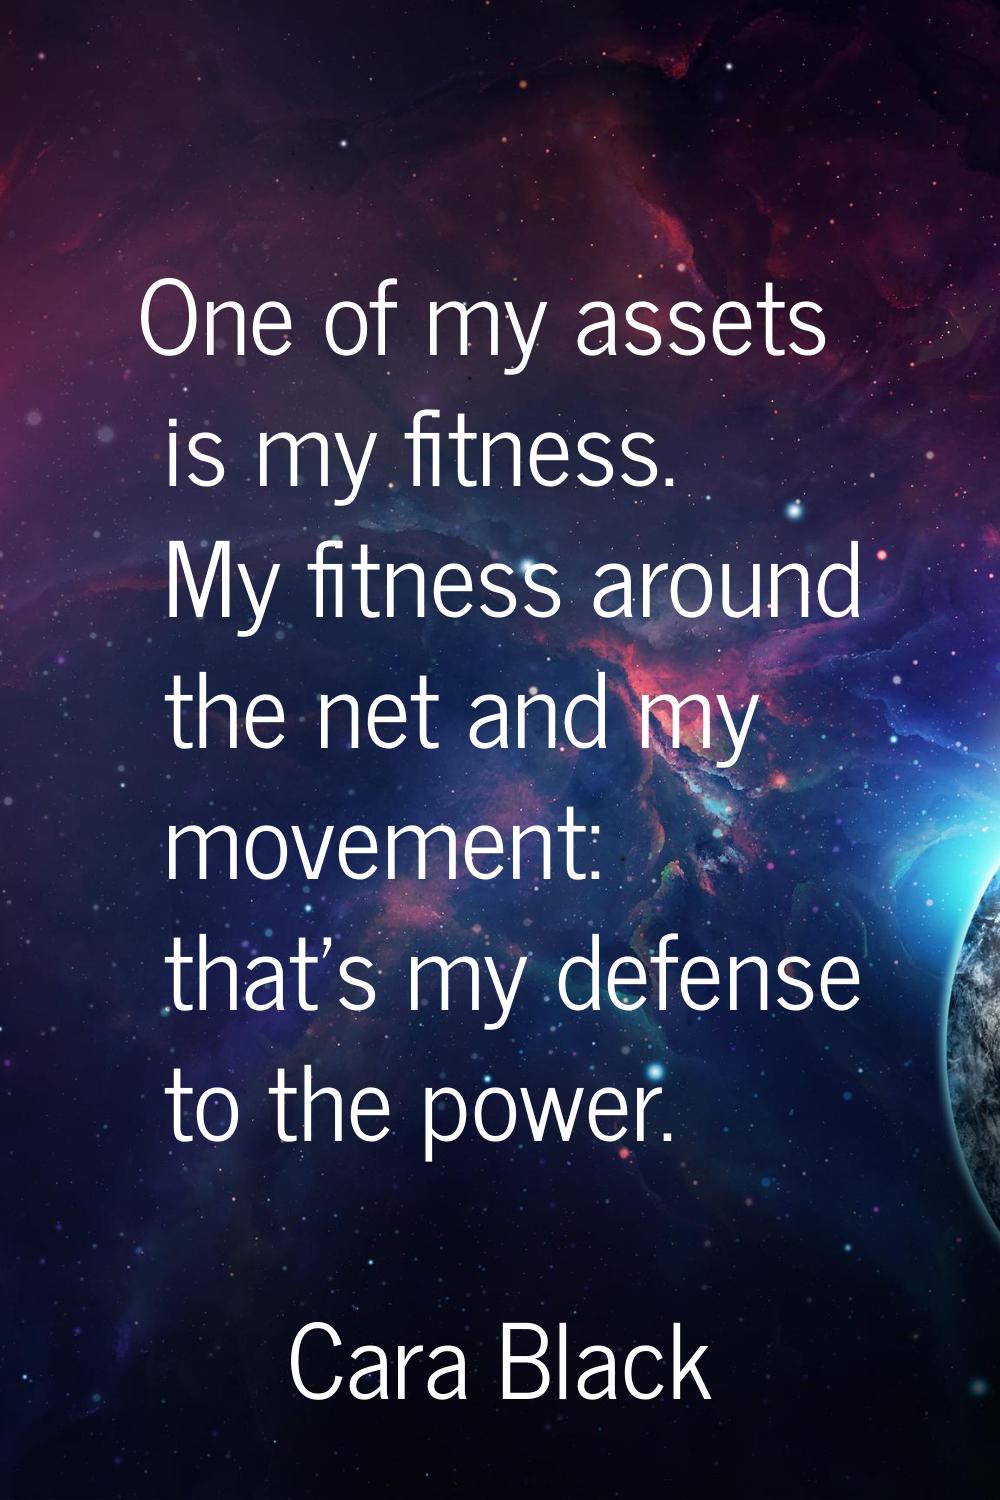 One of my assets is my fitness. My fitness around the net and my movement: that's my defense to the